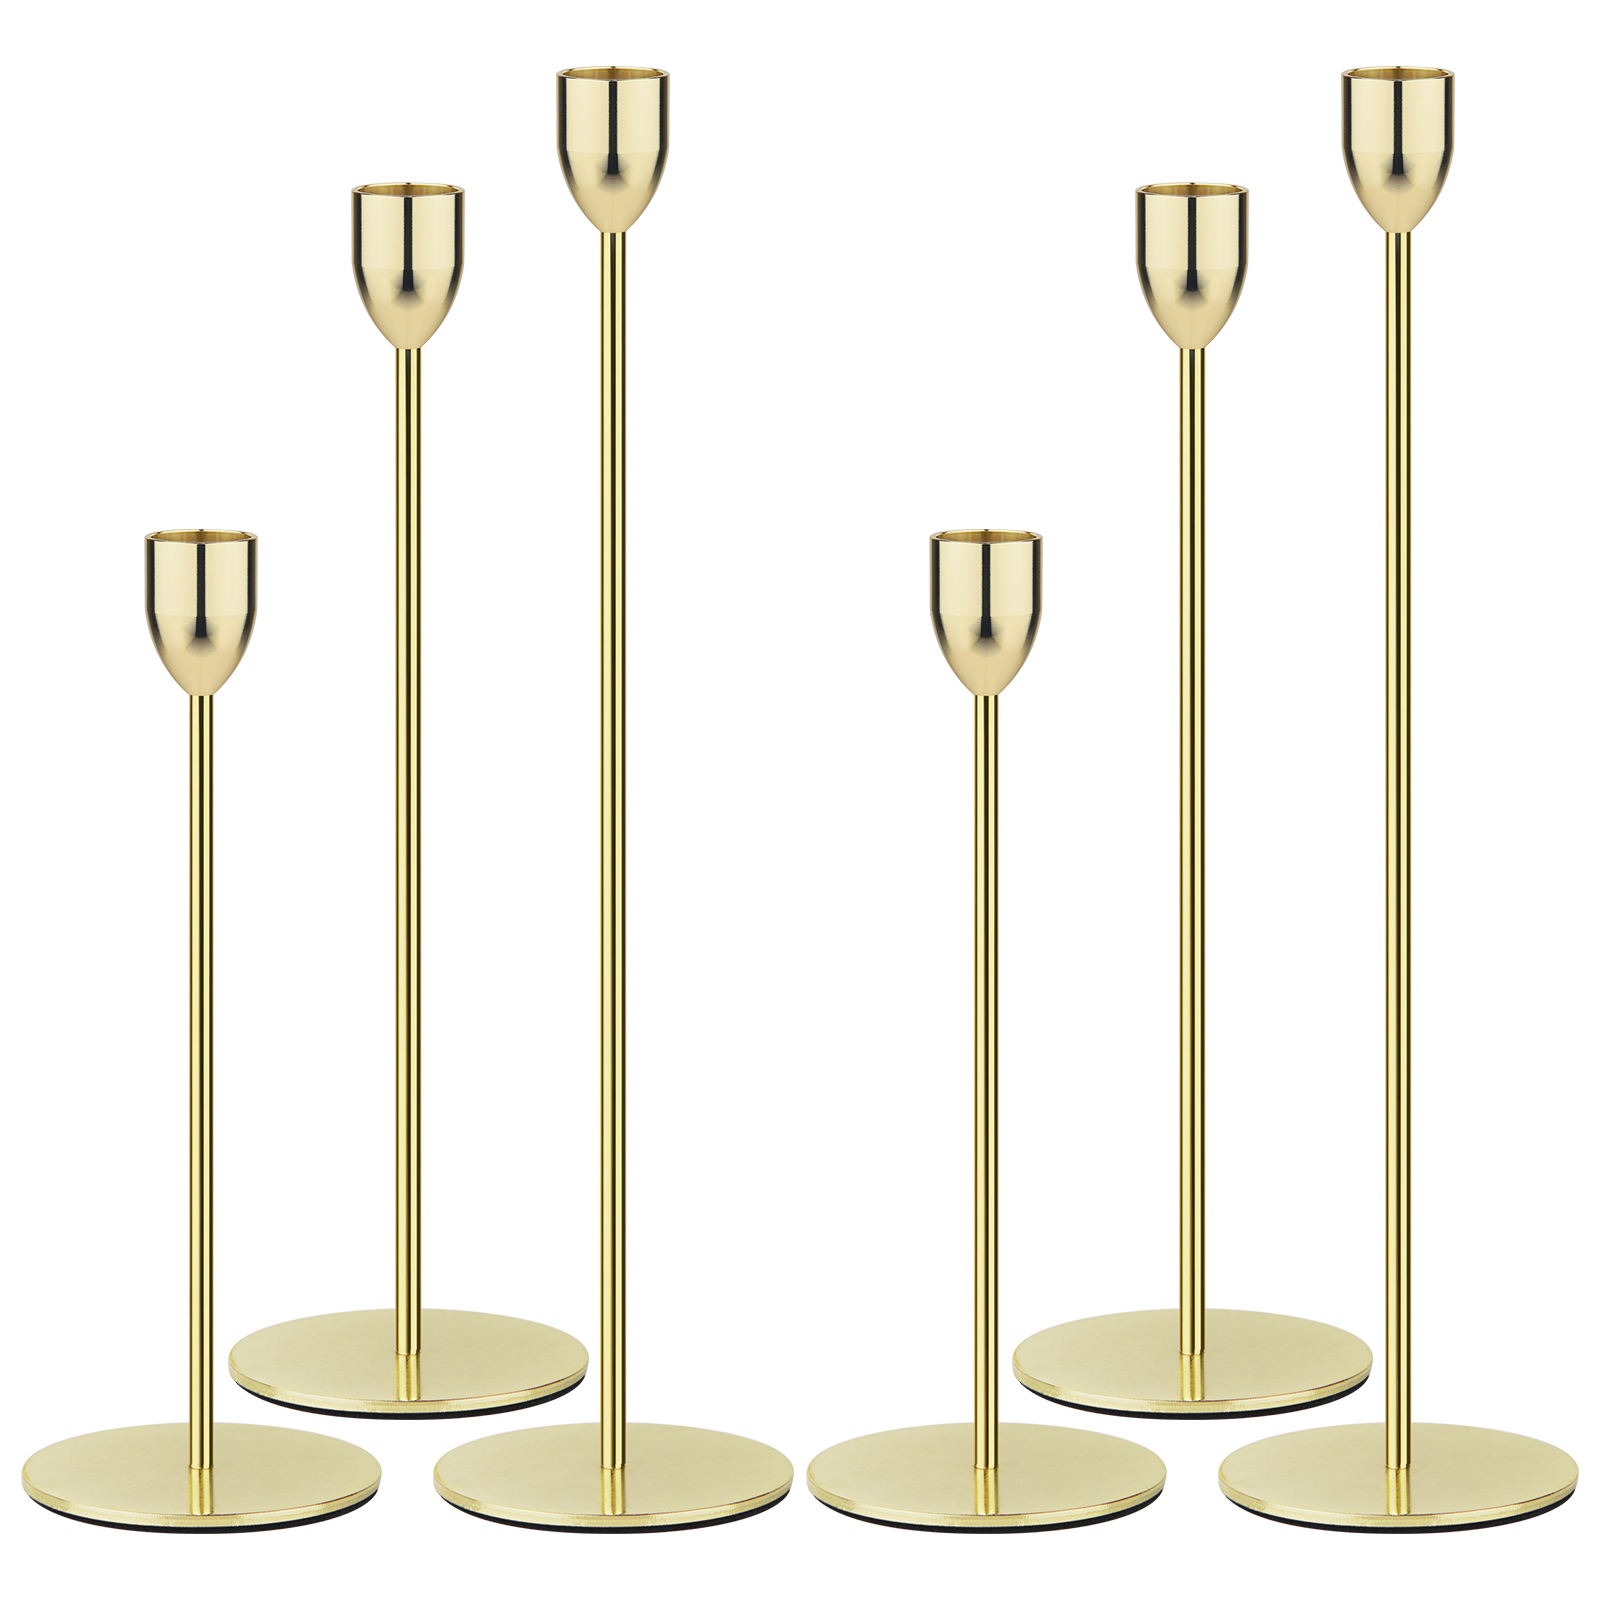 Ohtomber Gold Taper Candle Holders - 6PC